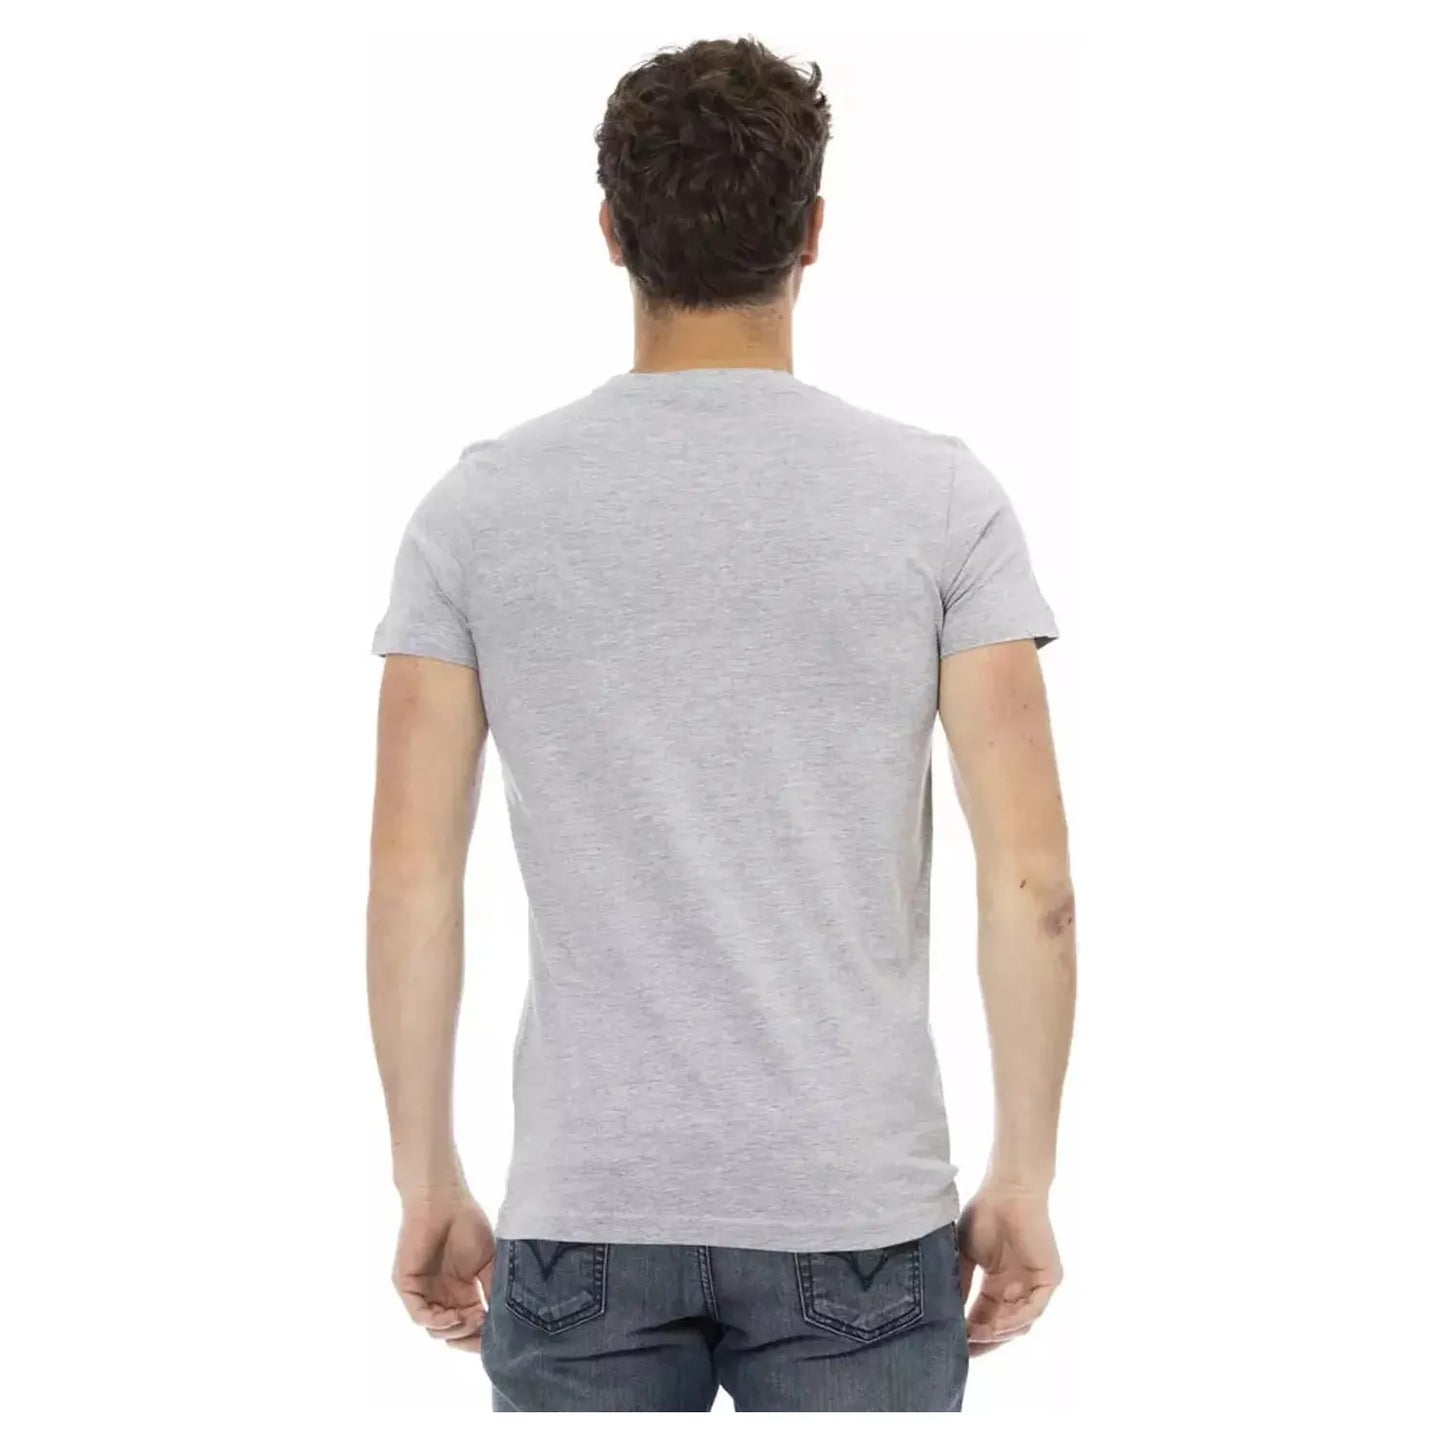 Trussardi Action Chic Graphite Short Sleeve Tee with Front Print gray-cotton-t-shirt-90 product-22672-121083643-20-44336177-6b4.webp